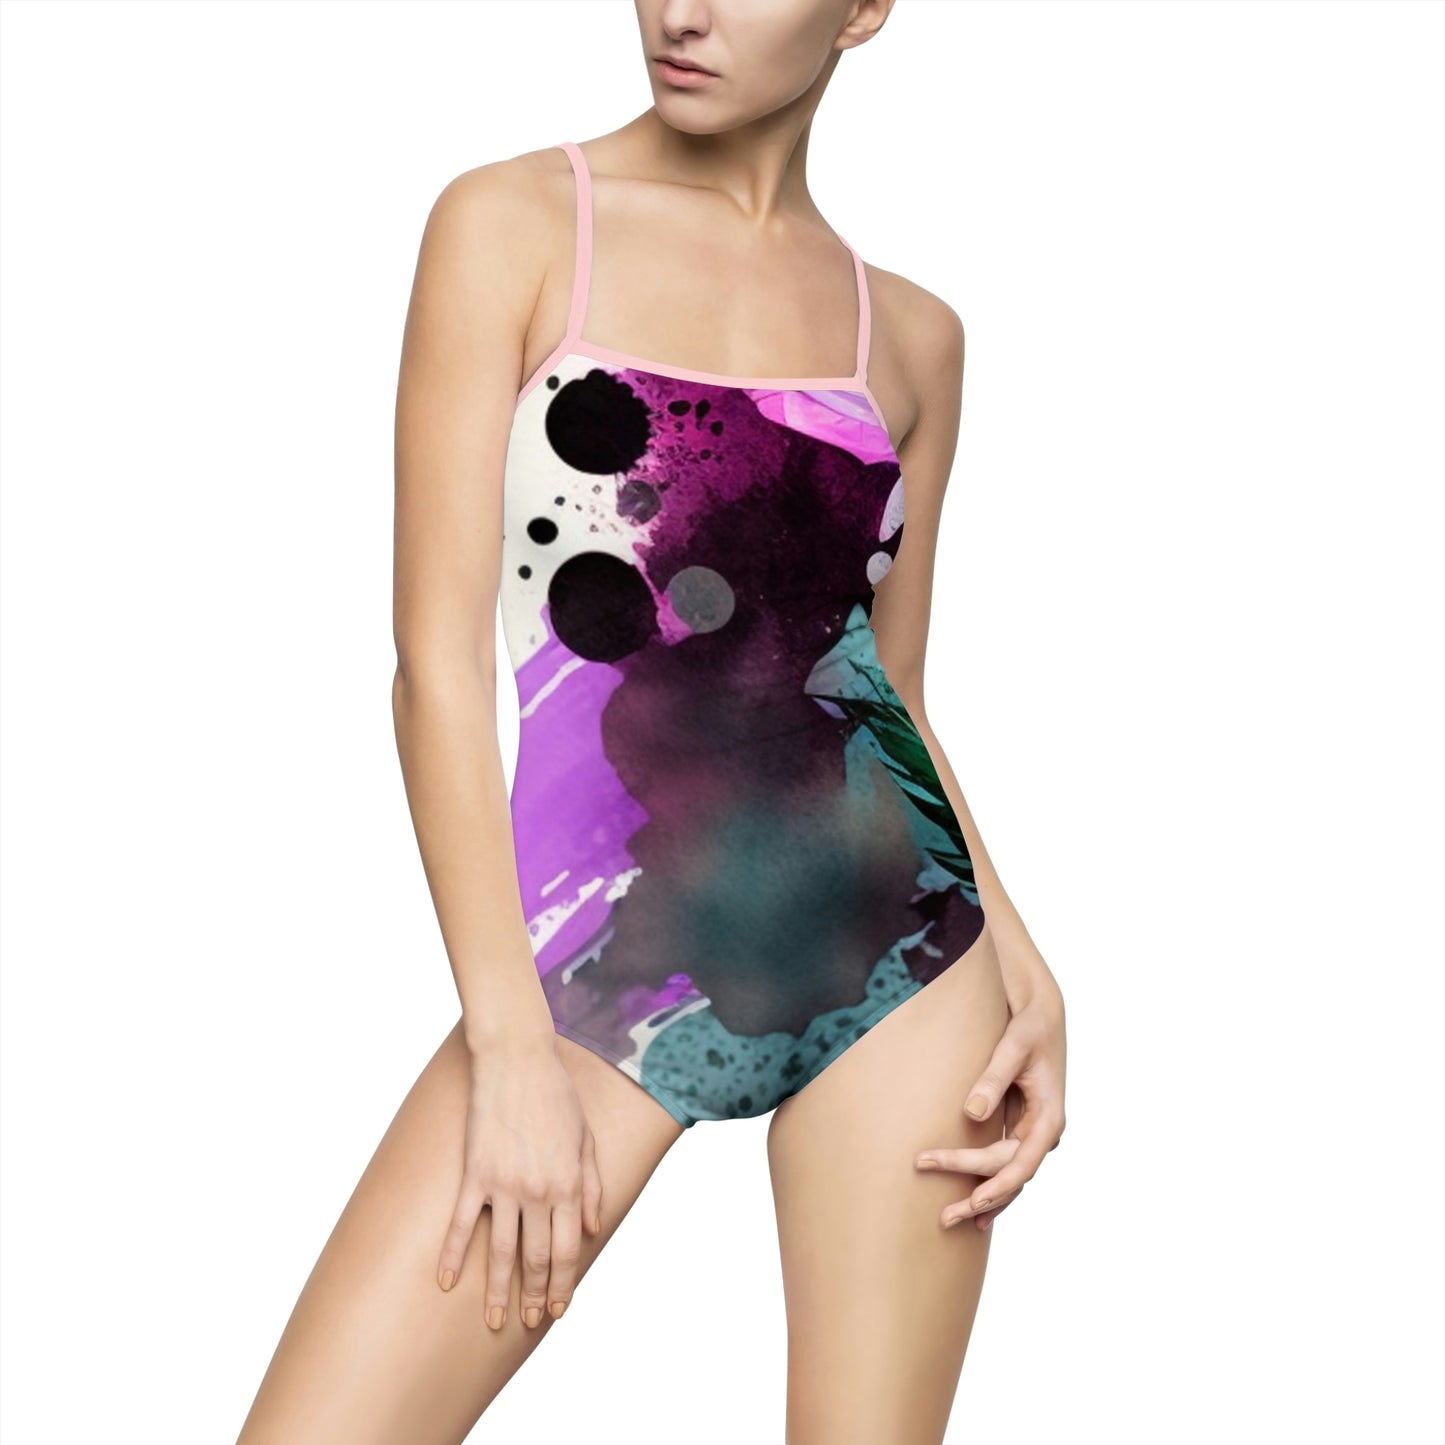 Women's One-piece Swimsuit (AOP) Bright Spring Flowers 1